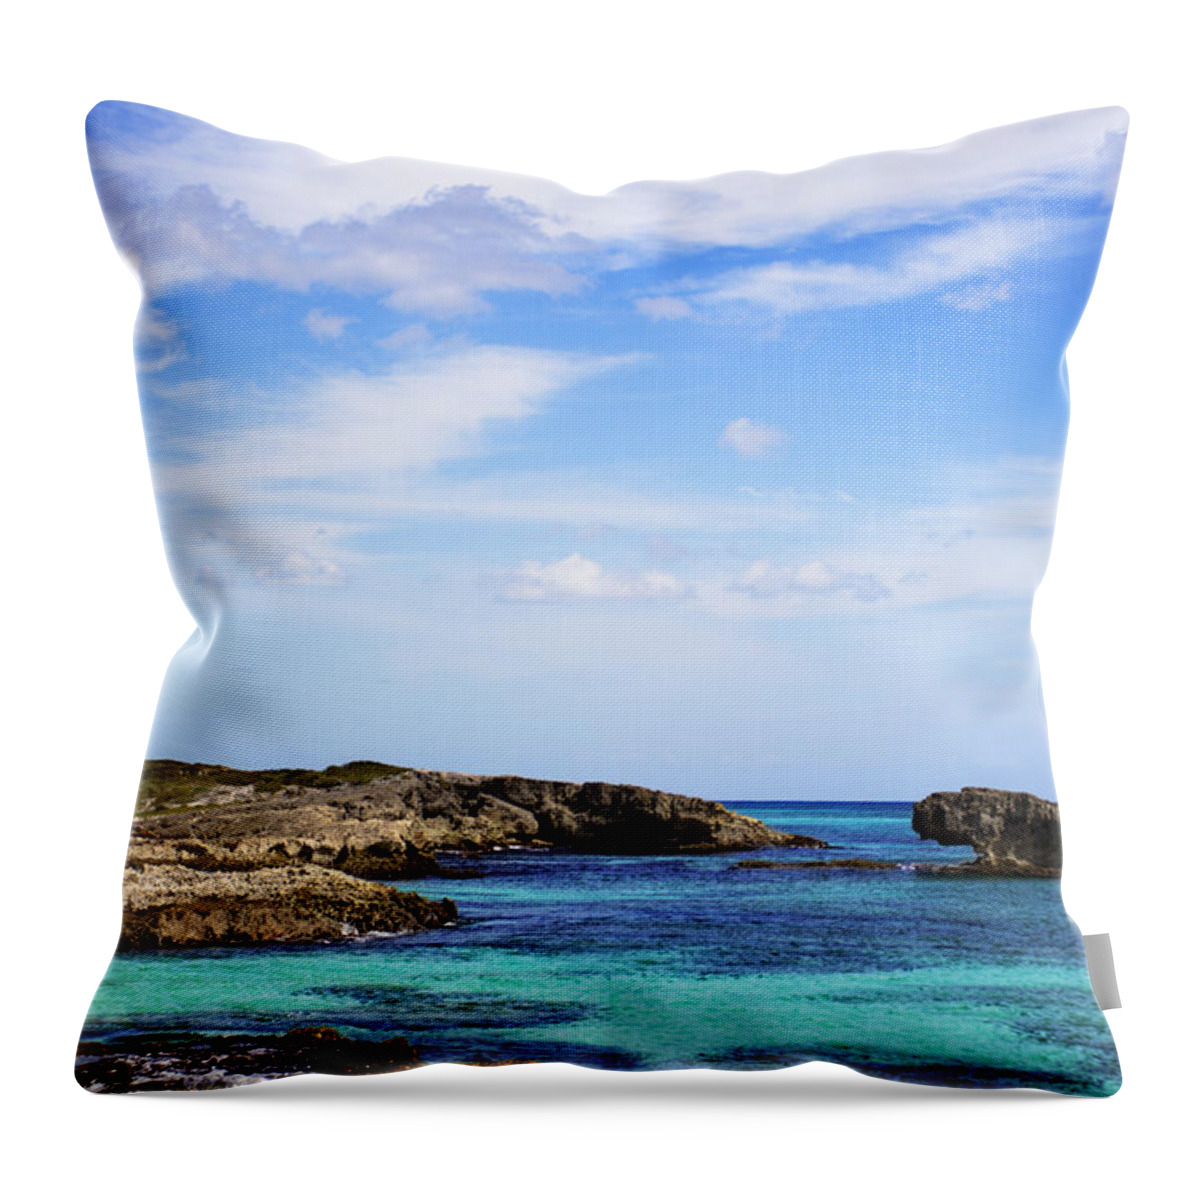 Cozumel Mexico Throw Pillow featuring the photograph Cozumel Mexico by Marlo Horne